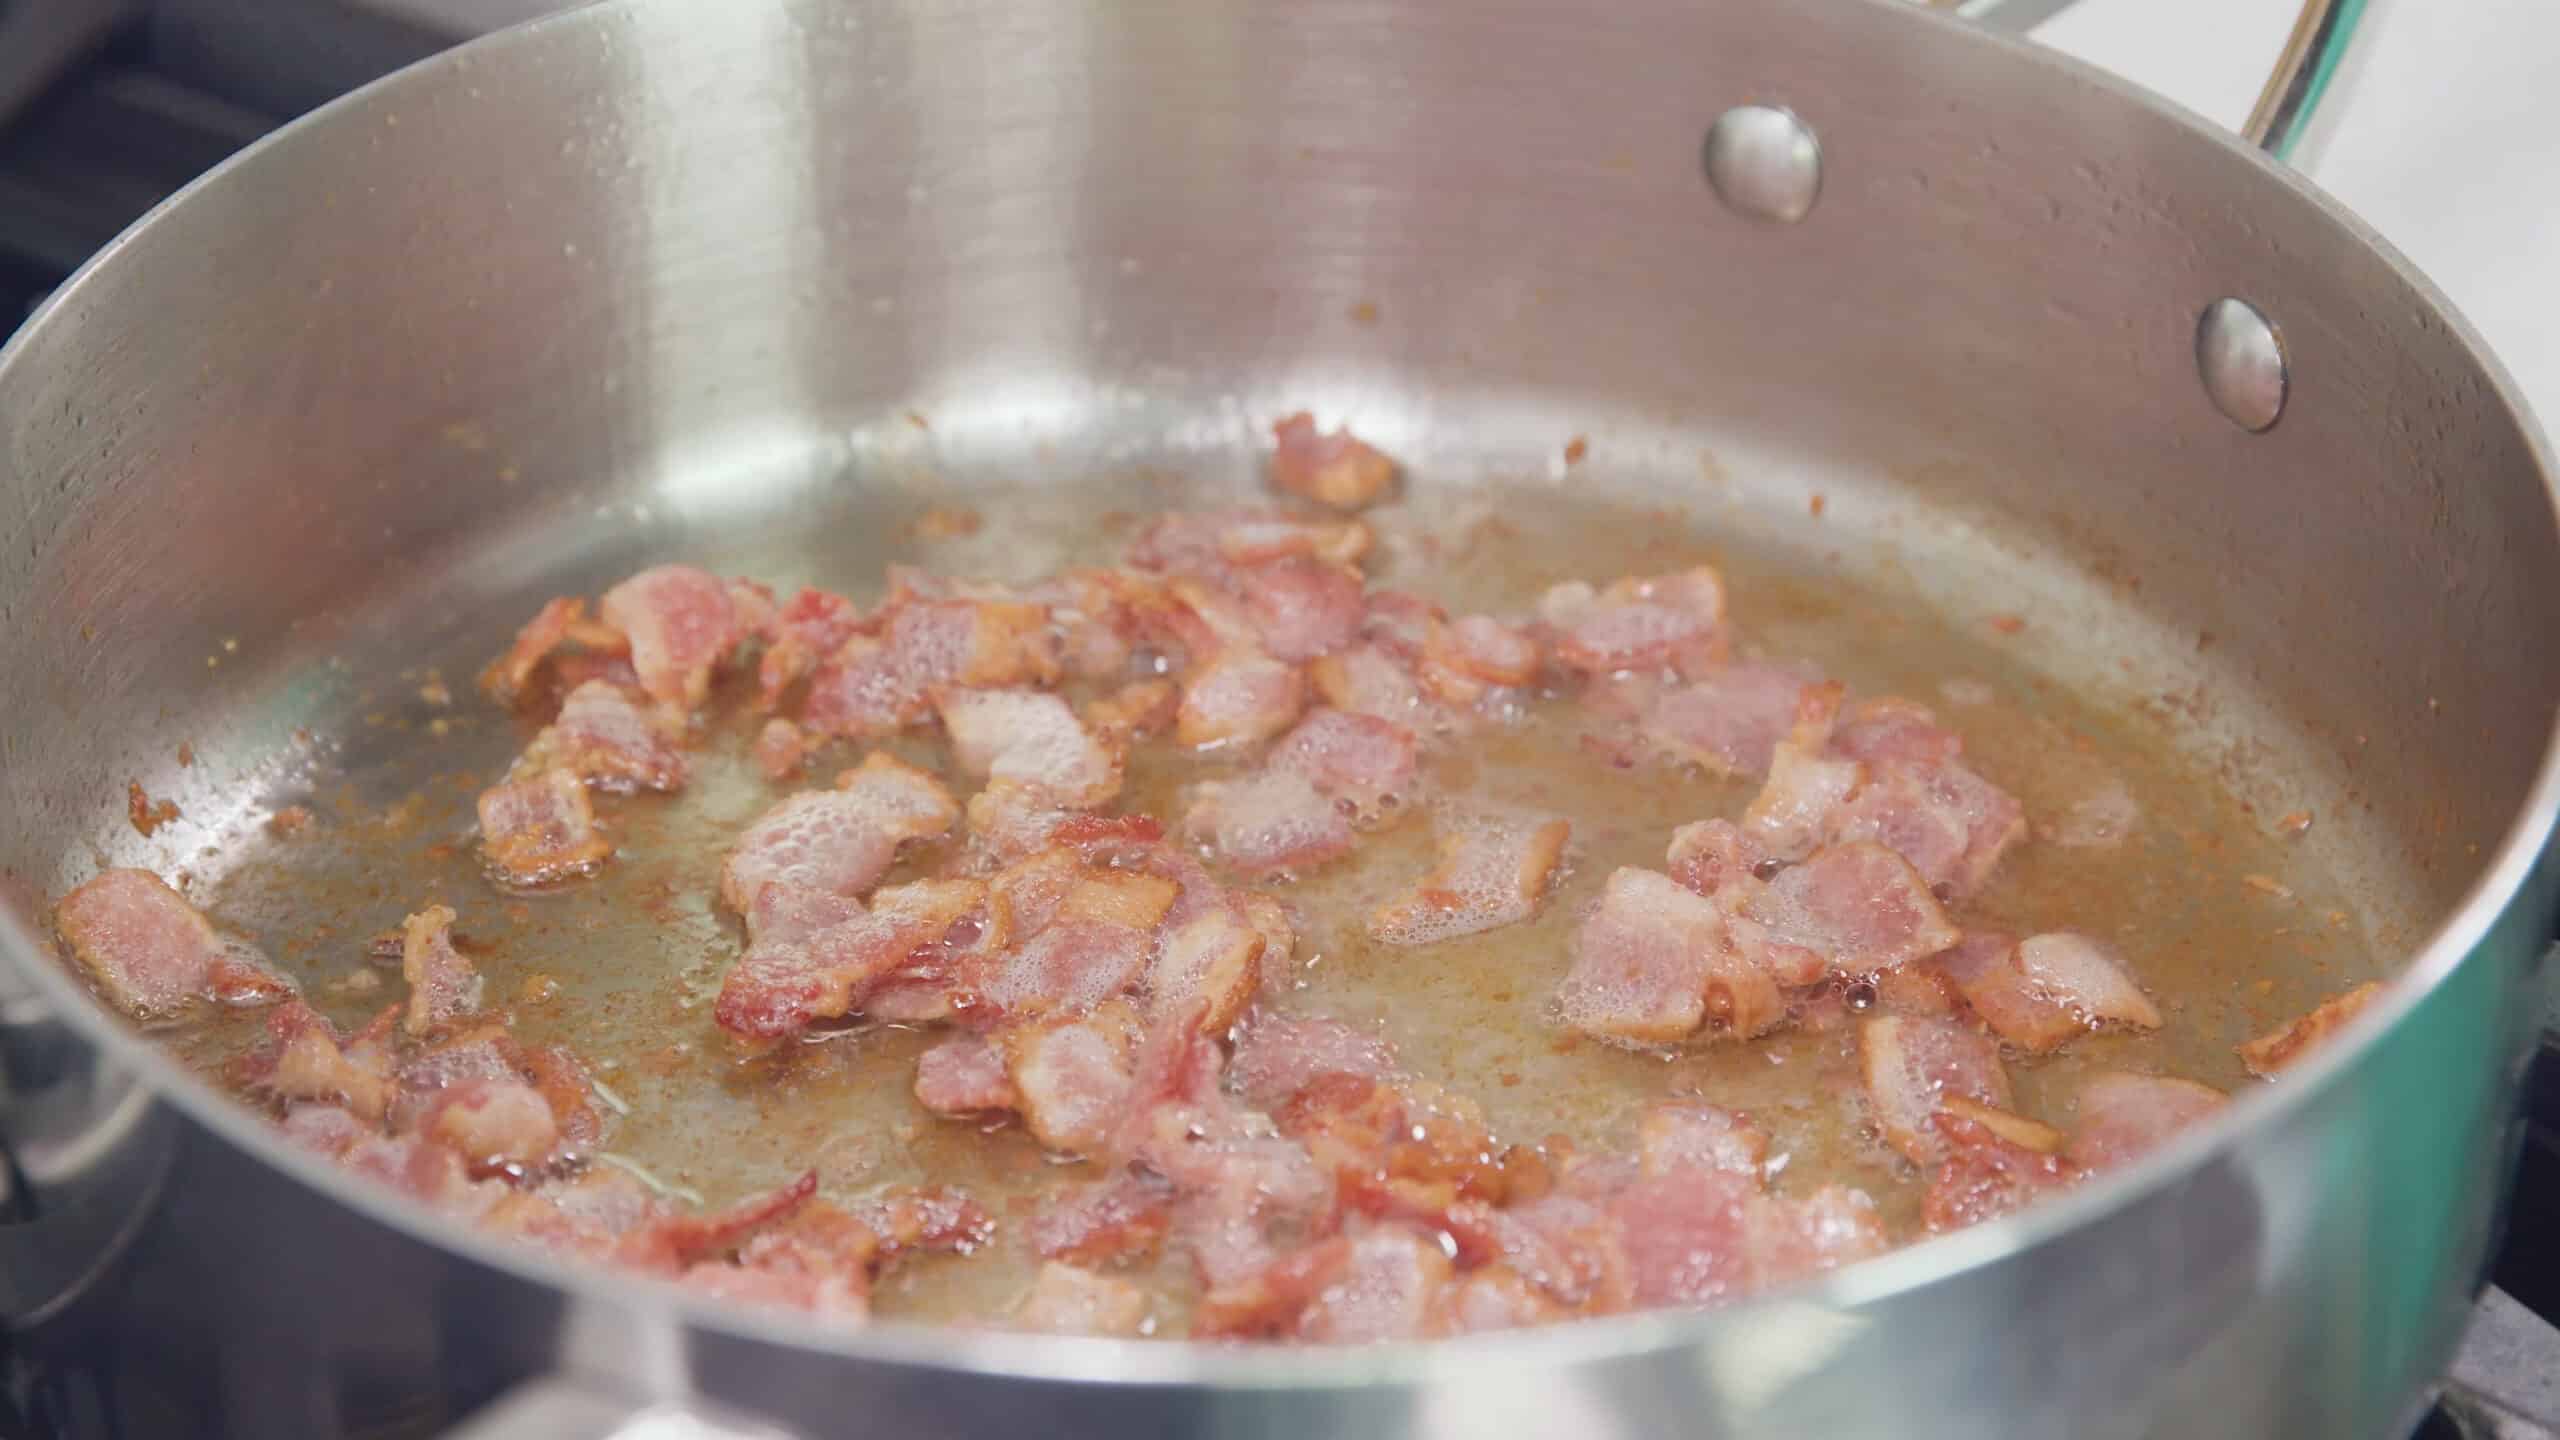 Close-up view of interior of stainless steel sauce pan with chopped pieces of bacon sizzling inside.